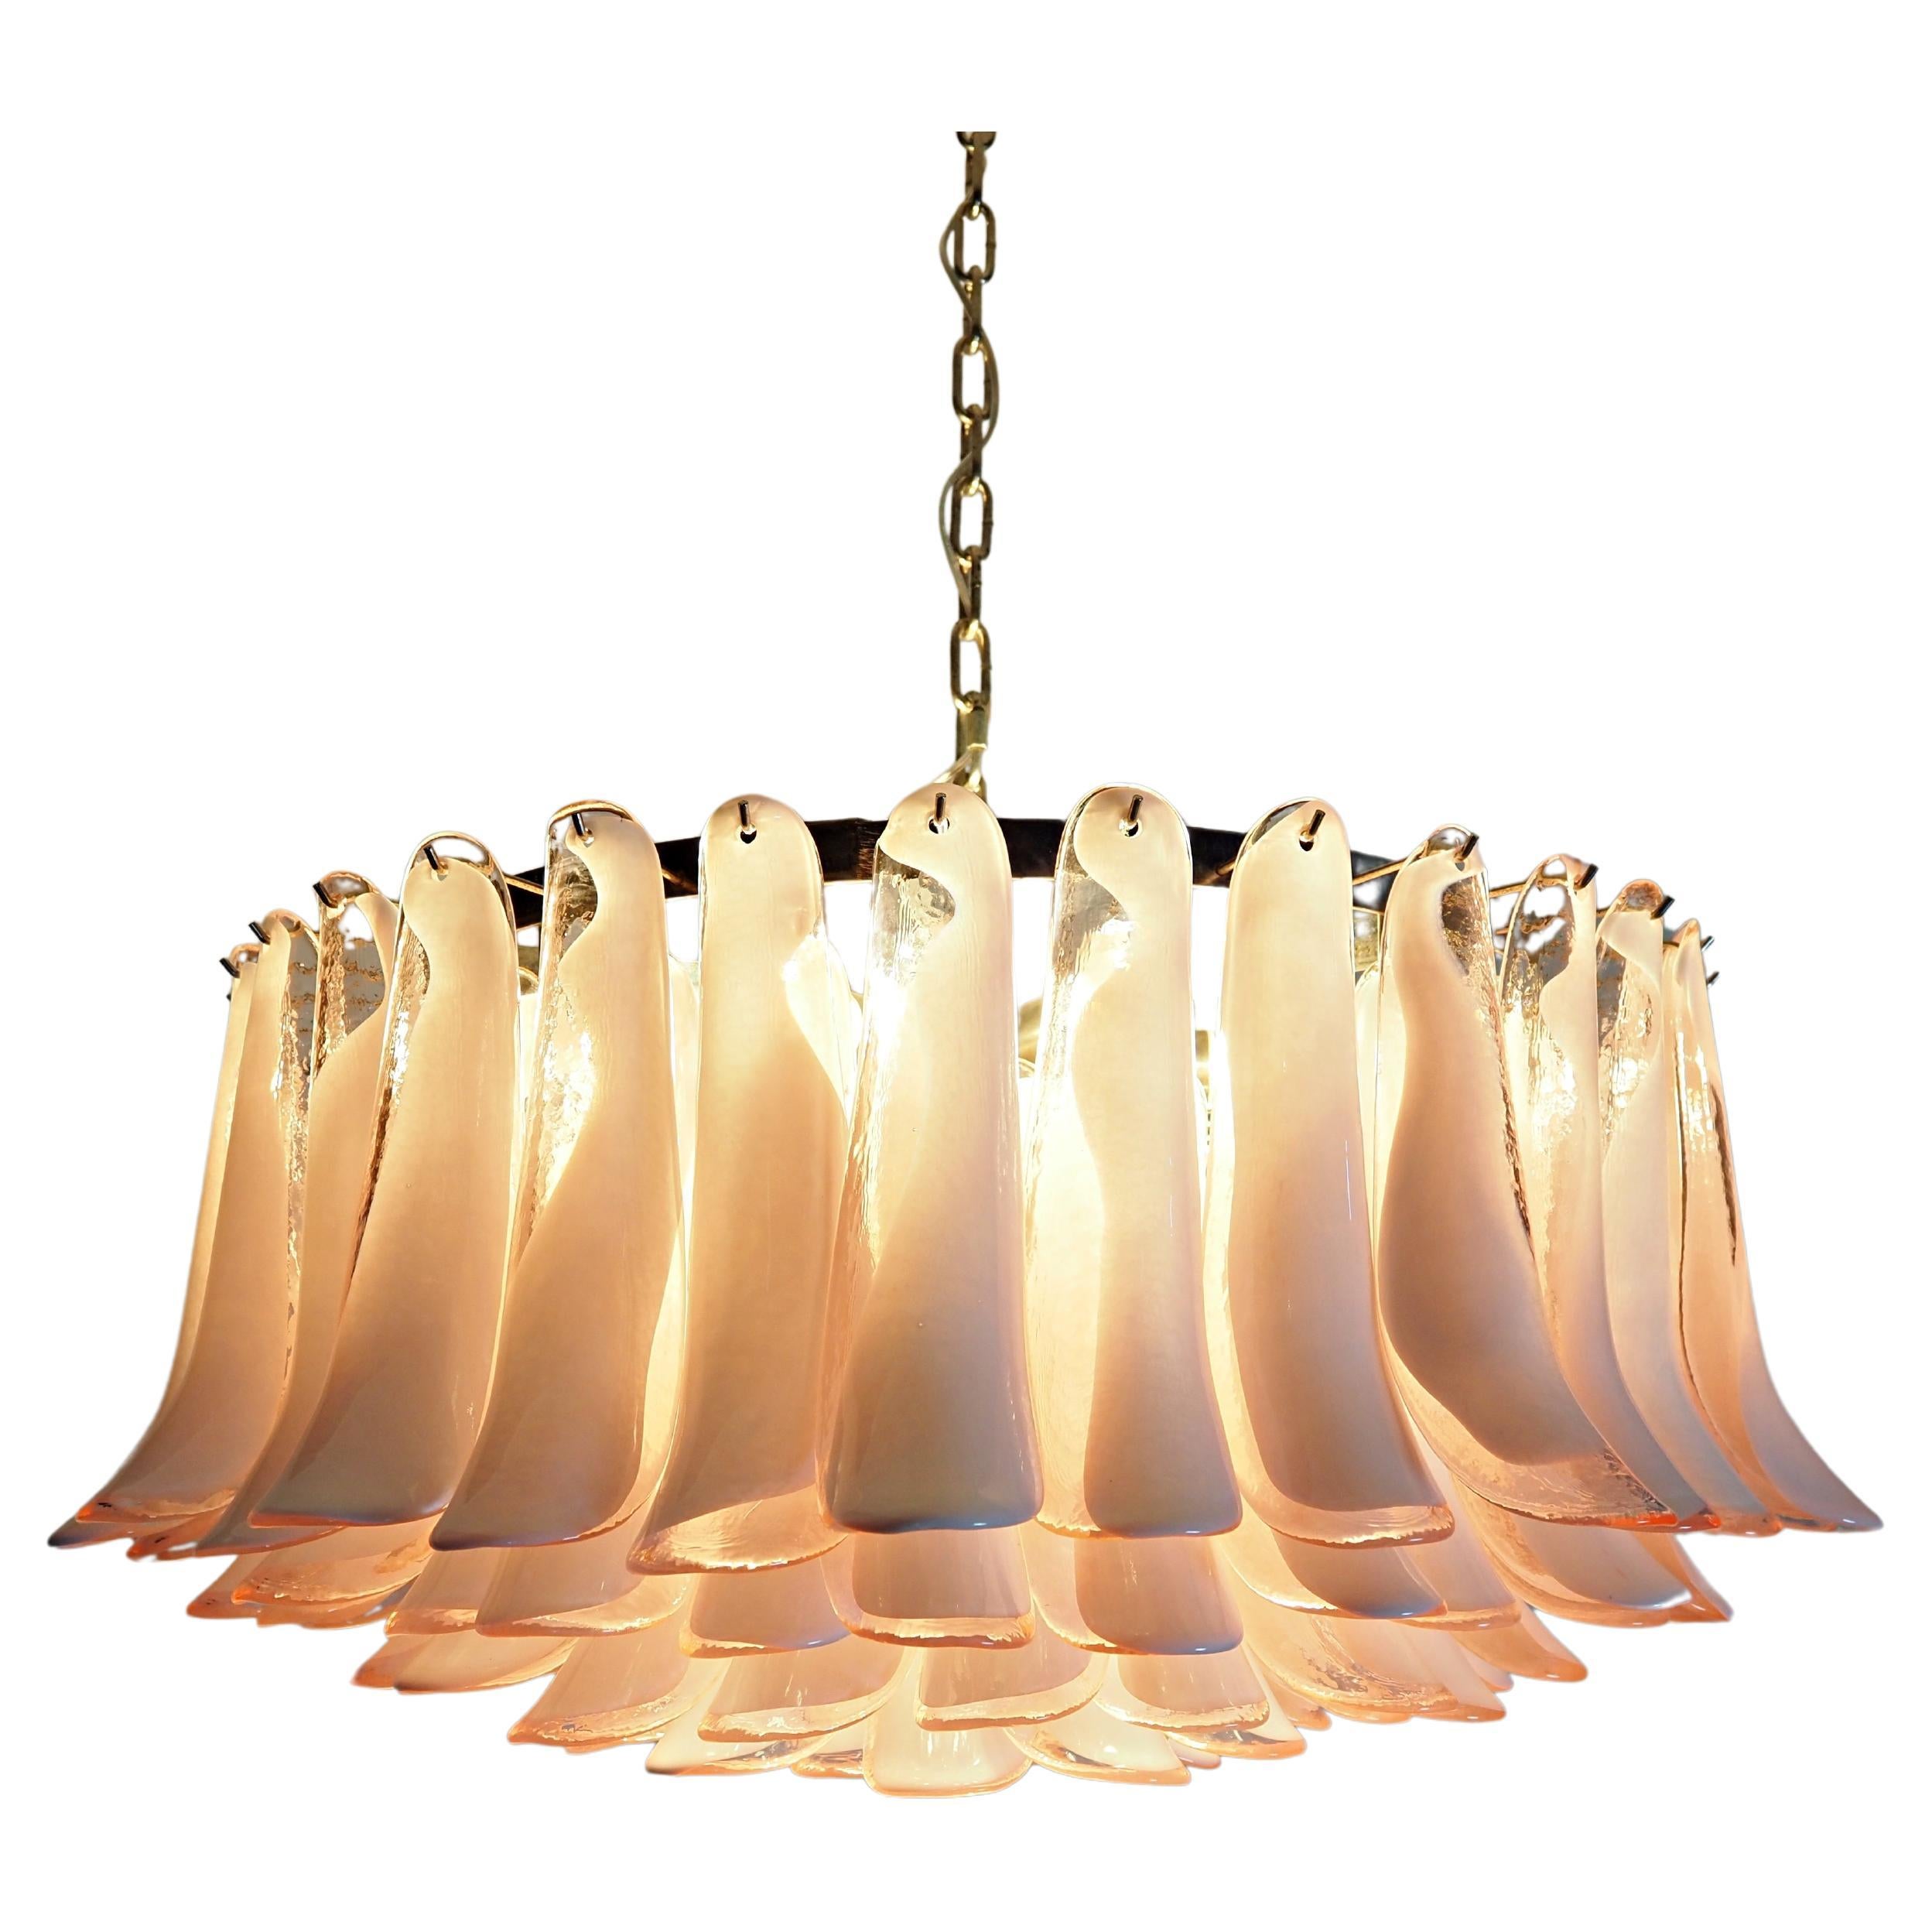 Italian vintage chandelier in Murano glass and nickel plated metal structure. The armor polished nickel supports 101 glass petals (pink and white “lattimo”) that give a very elegant look. Can be used as a chandelier with chain, or as a ceiling